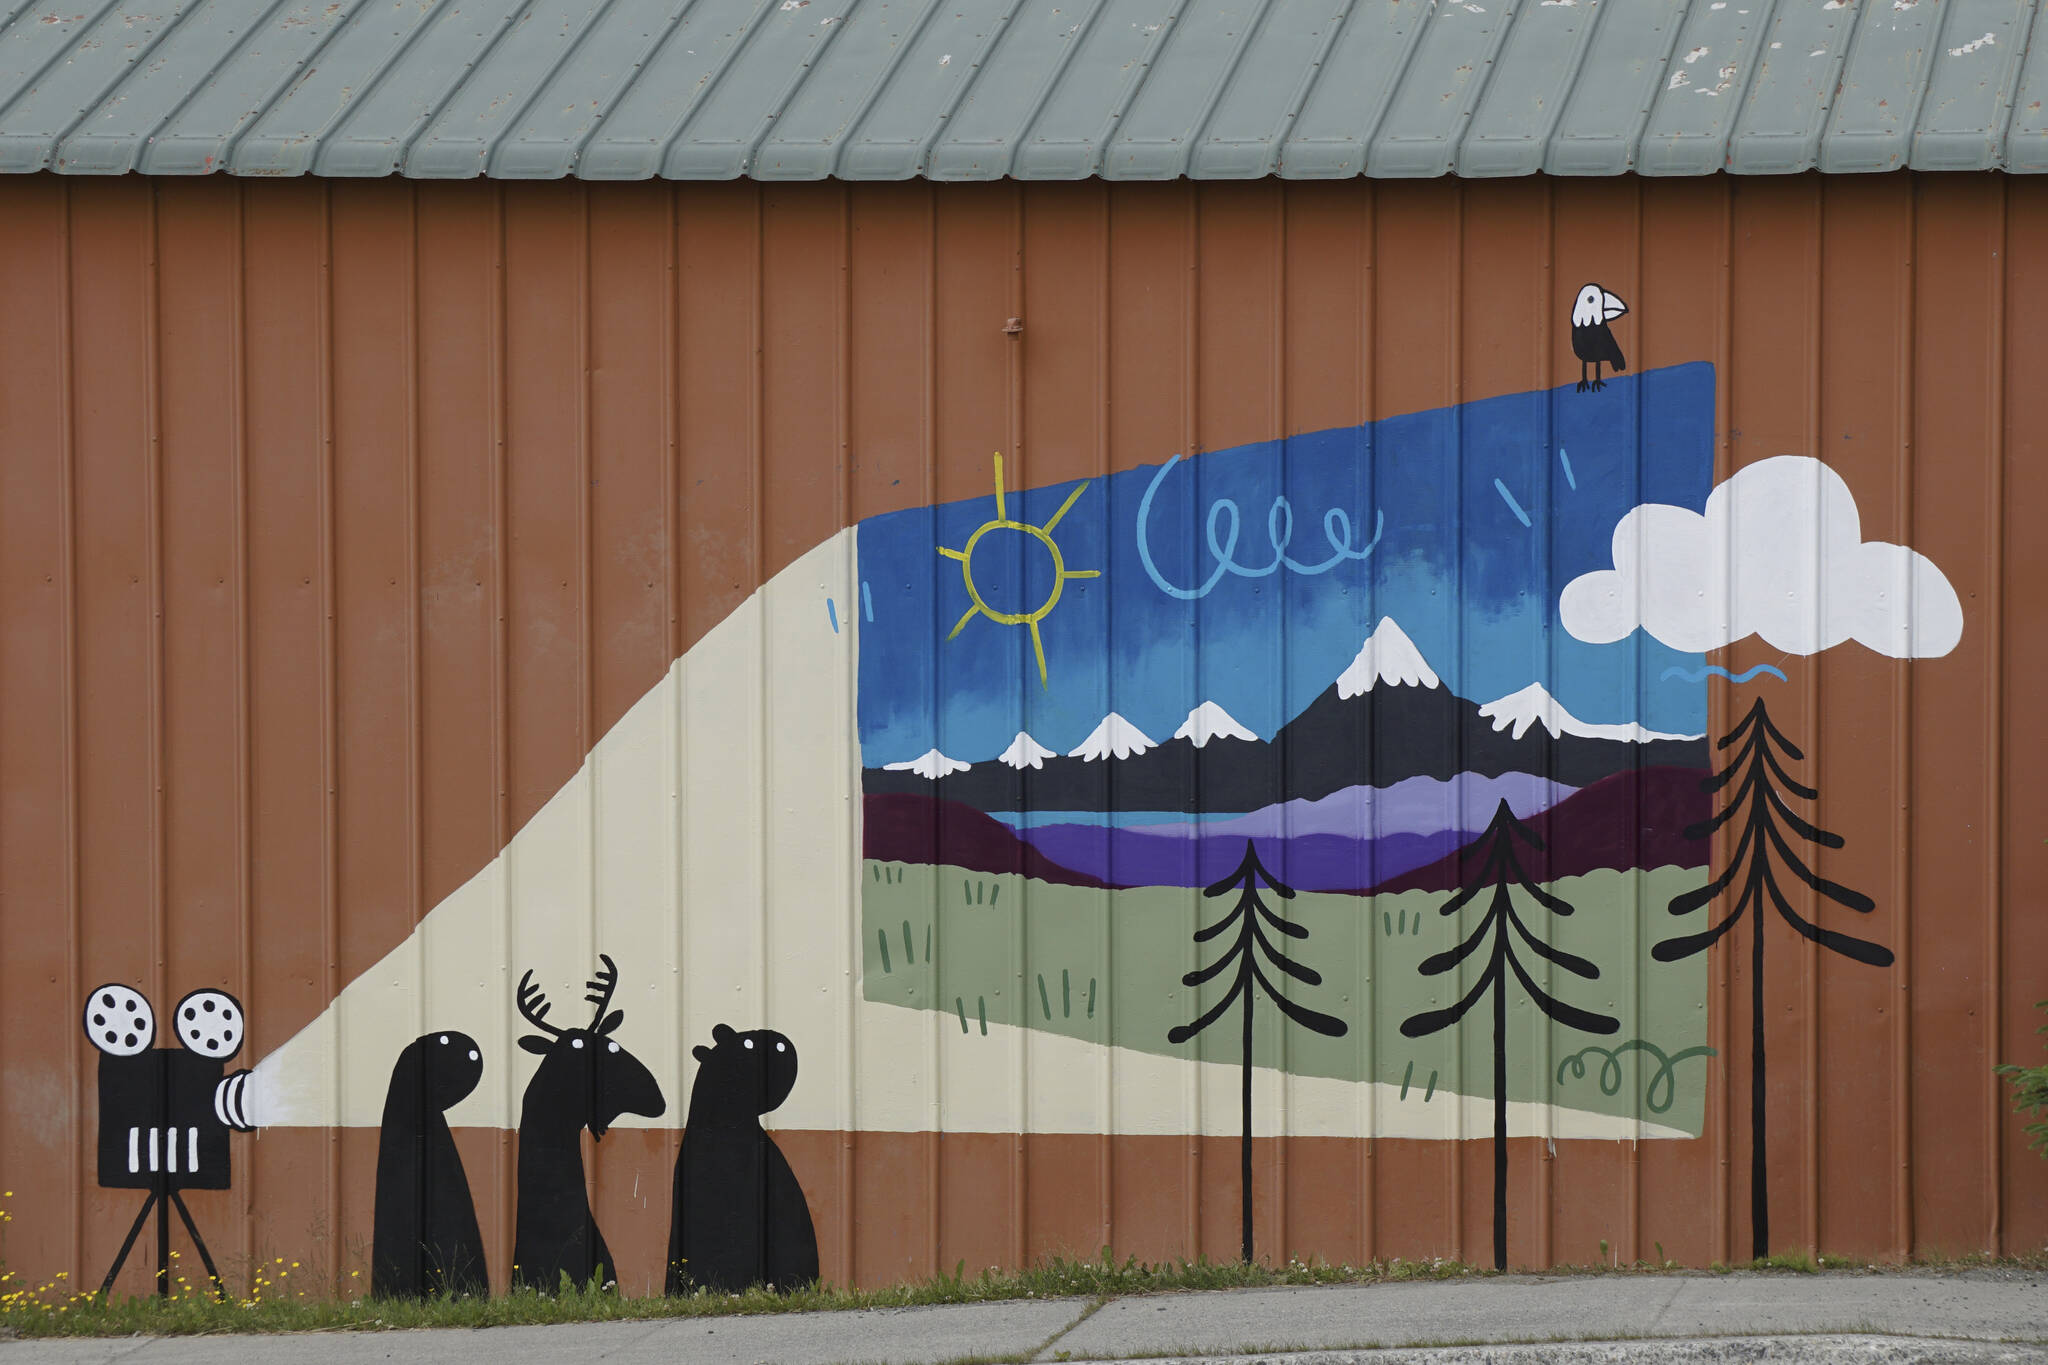 Swedish Dano (Daniel Wilhelmsson) painted this mural last week at the Homer Theatre, as seen on Saturday, June 18, 2022, at the movie theater in Homer, Alaska. Dano is an artist in residence at Bunnell Street Arts Center. (Photo by Michael Armstrong/Homer News)